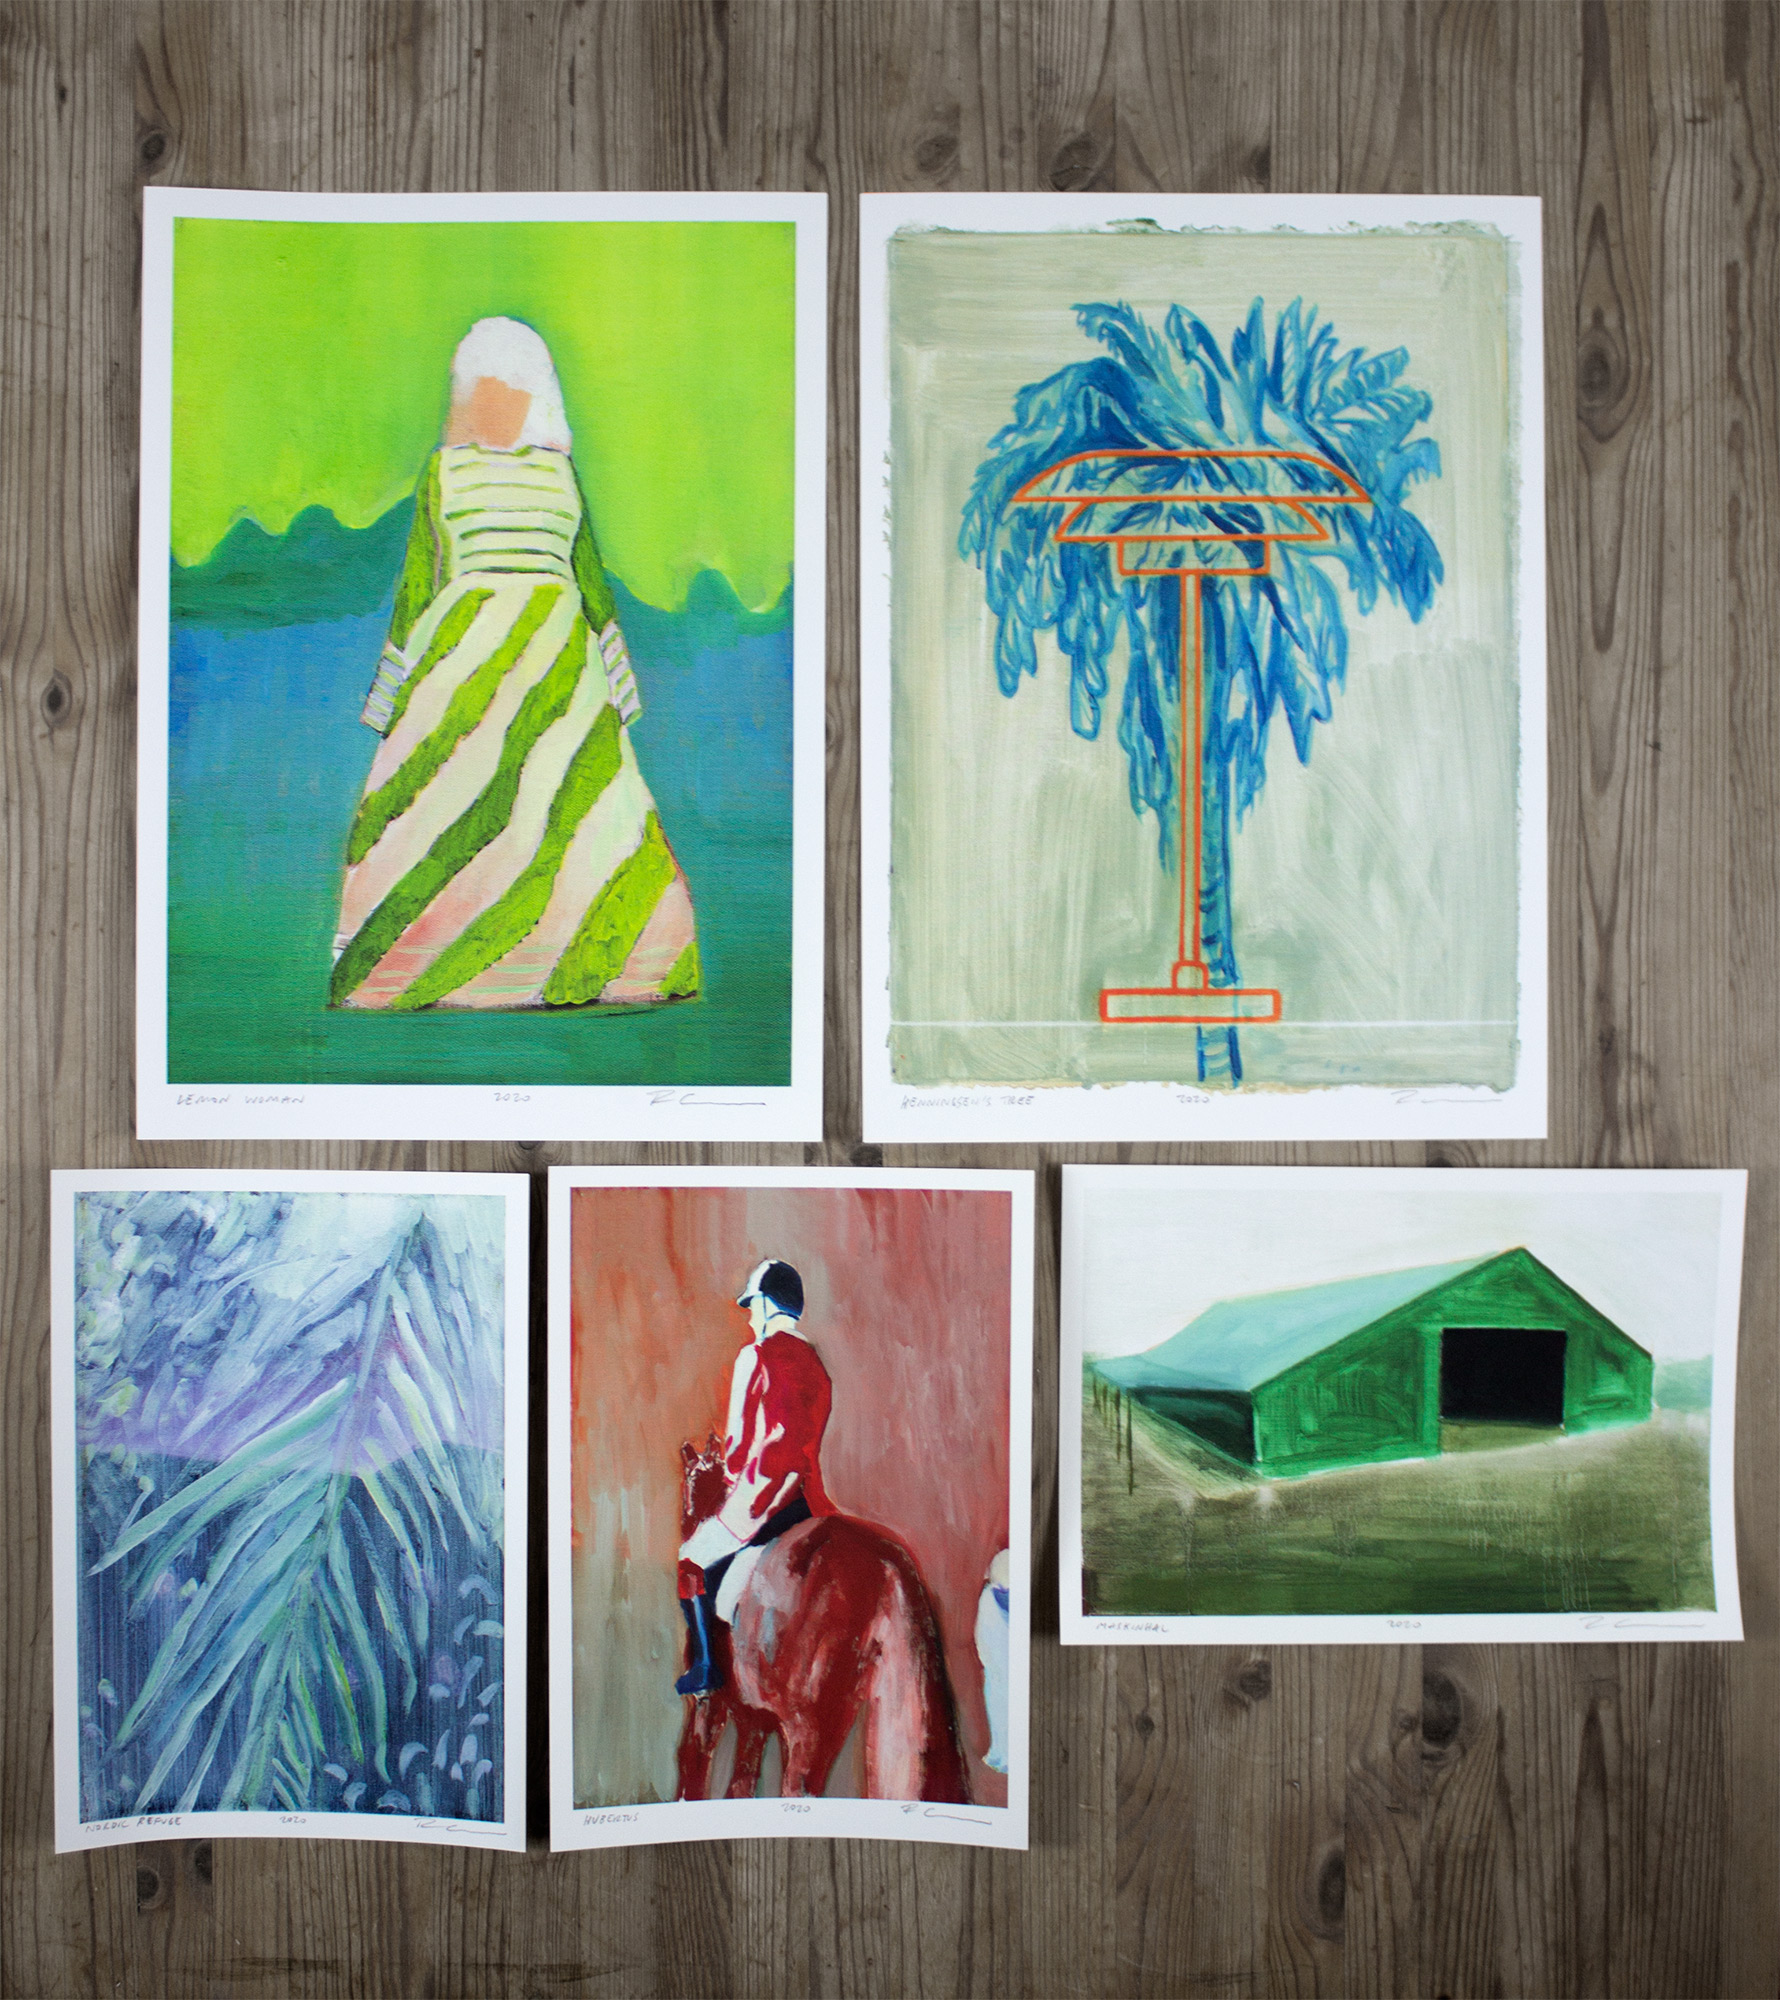 posters-prints, giclee-print, aesthetic, figurative, graphical, illustrative, still-life, architecture, botany, beige, blue, brown, orange, turquoise, ink, paper, beautiful, contemporary-art, copenhagen, danish, decorative, design, interior, interior-design, modern, modern-art, nordic, posters, prints, scandinavien, trees, Buy original high quality art. Paintings, drawings, limited edition prints & posters by talented artists.